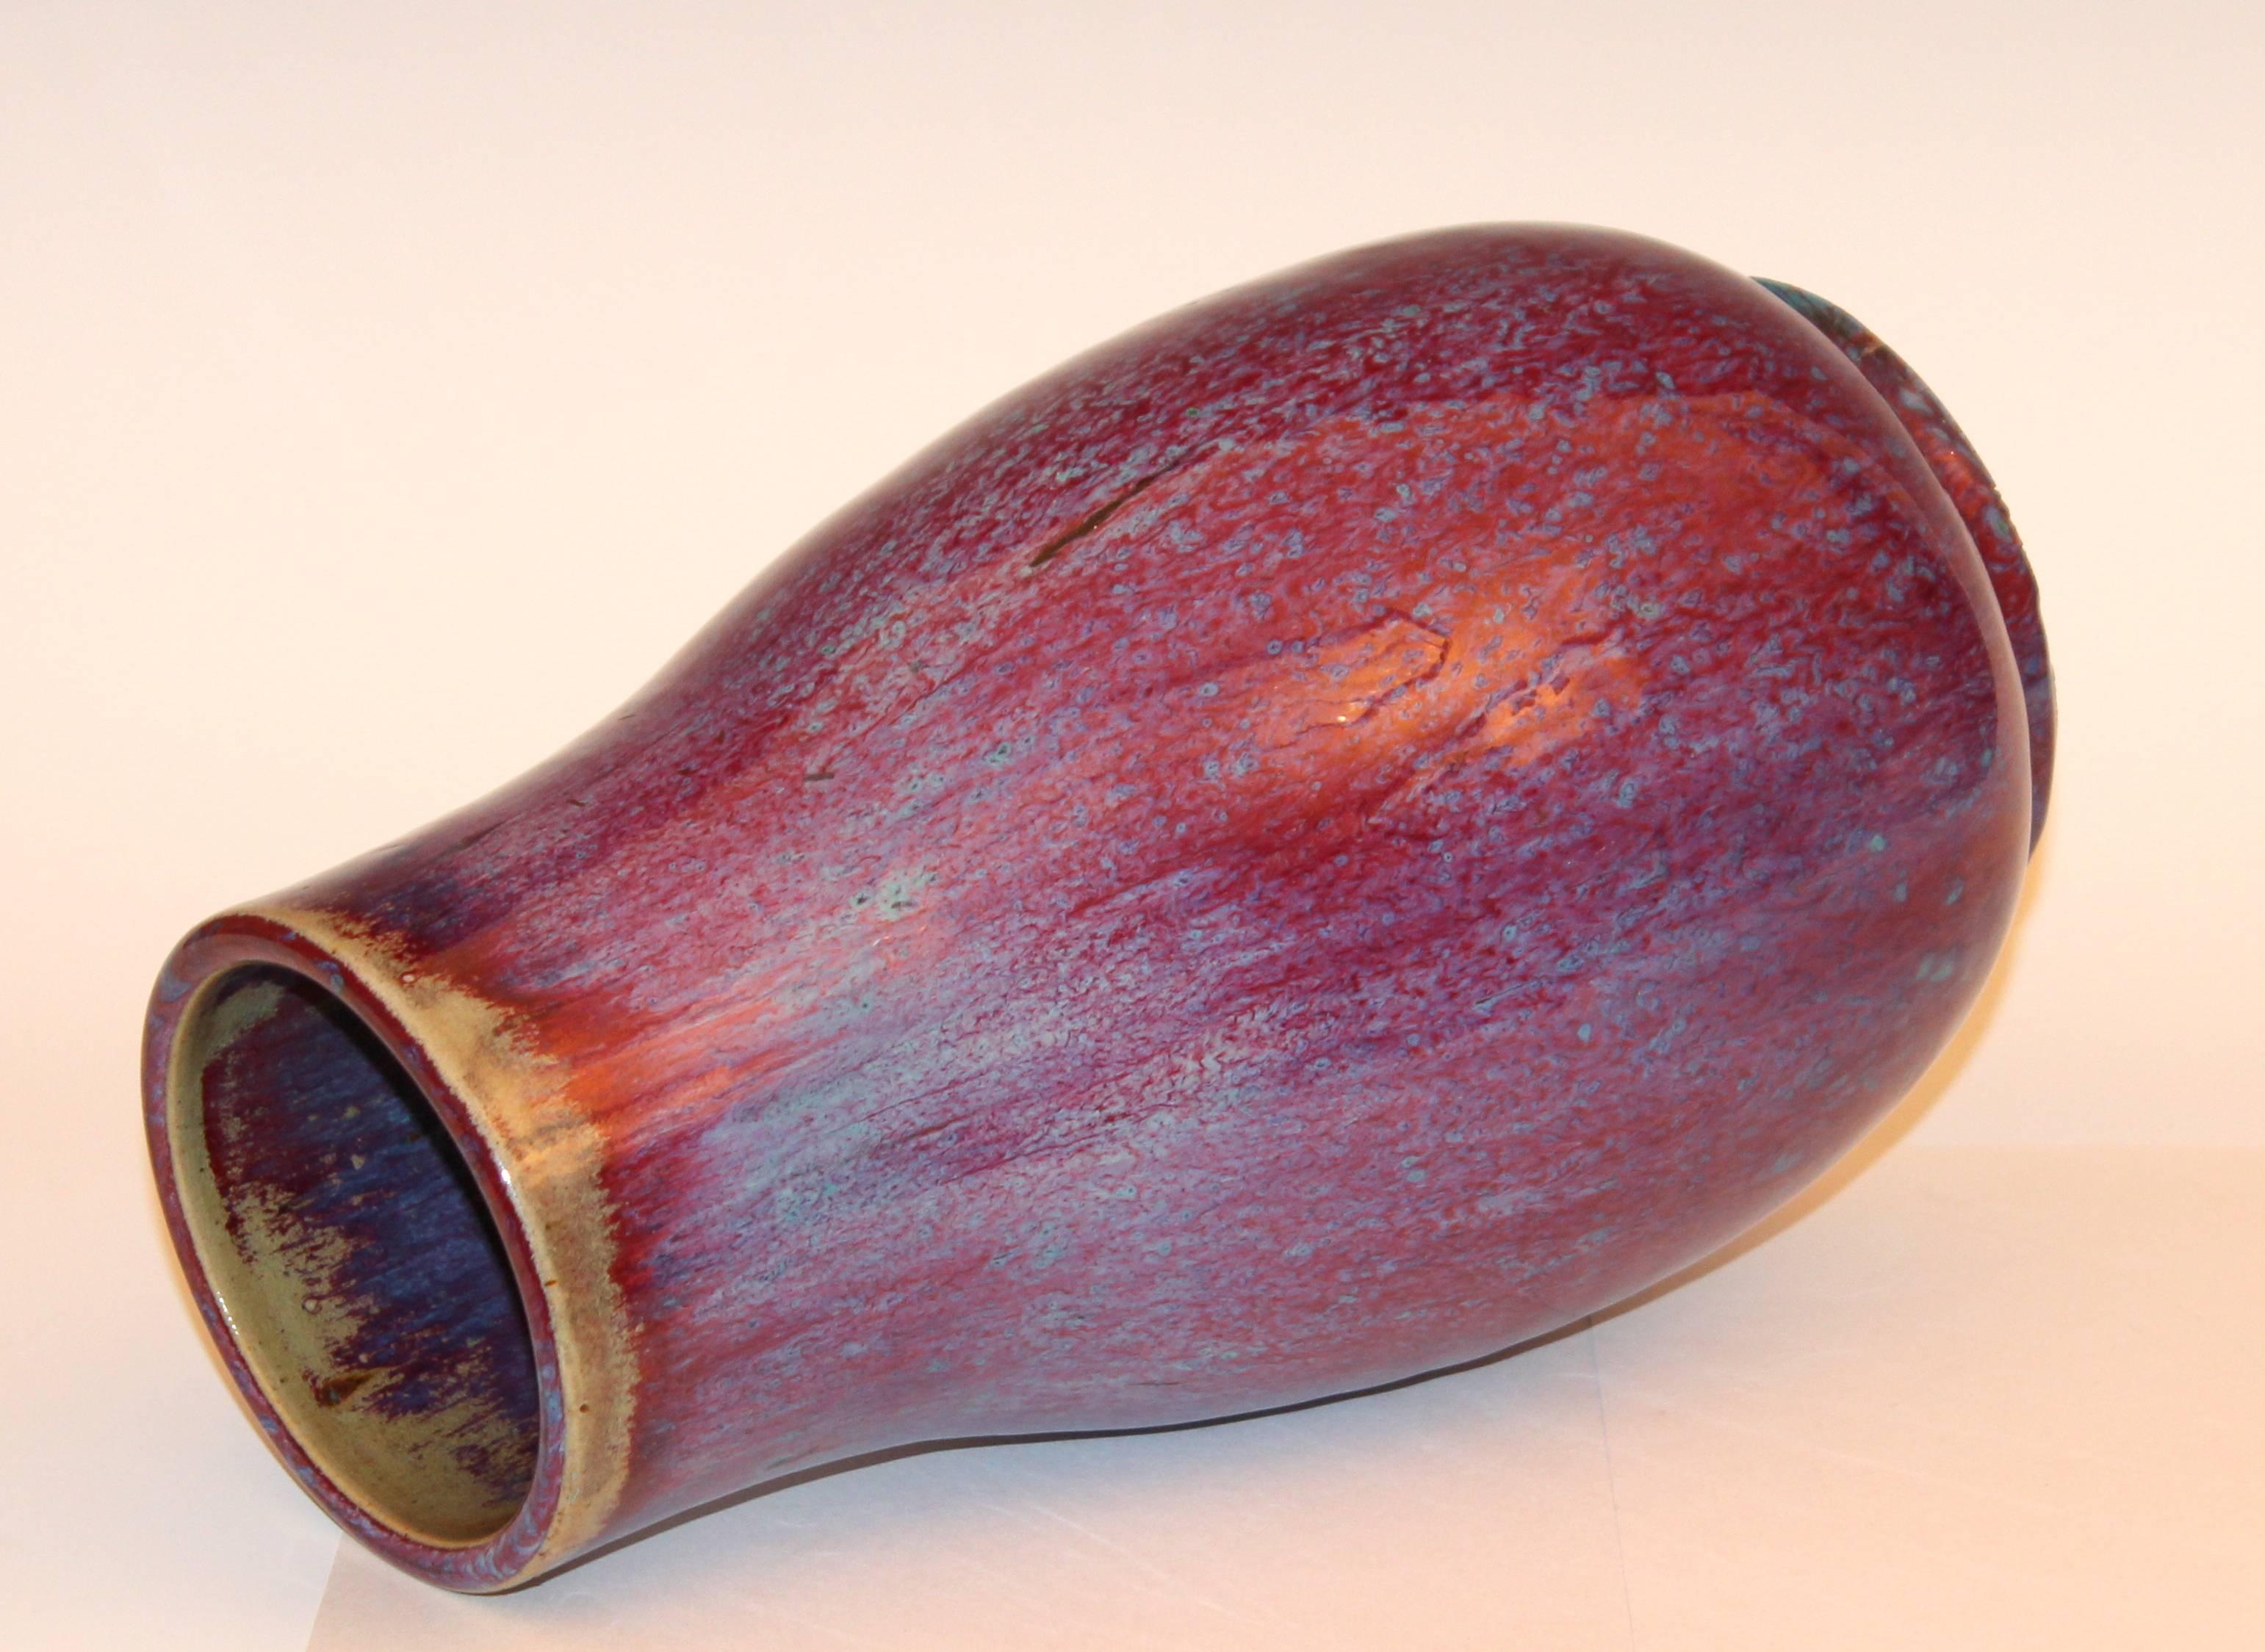 Japanese pear form vase with terrific red and blue flambé glaze, circa 1910s. Measures: 11 3/4